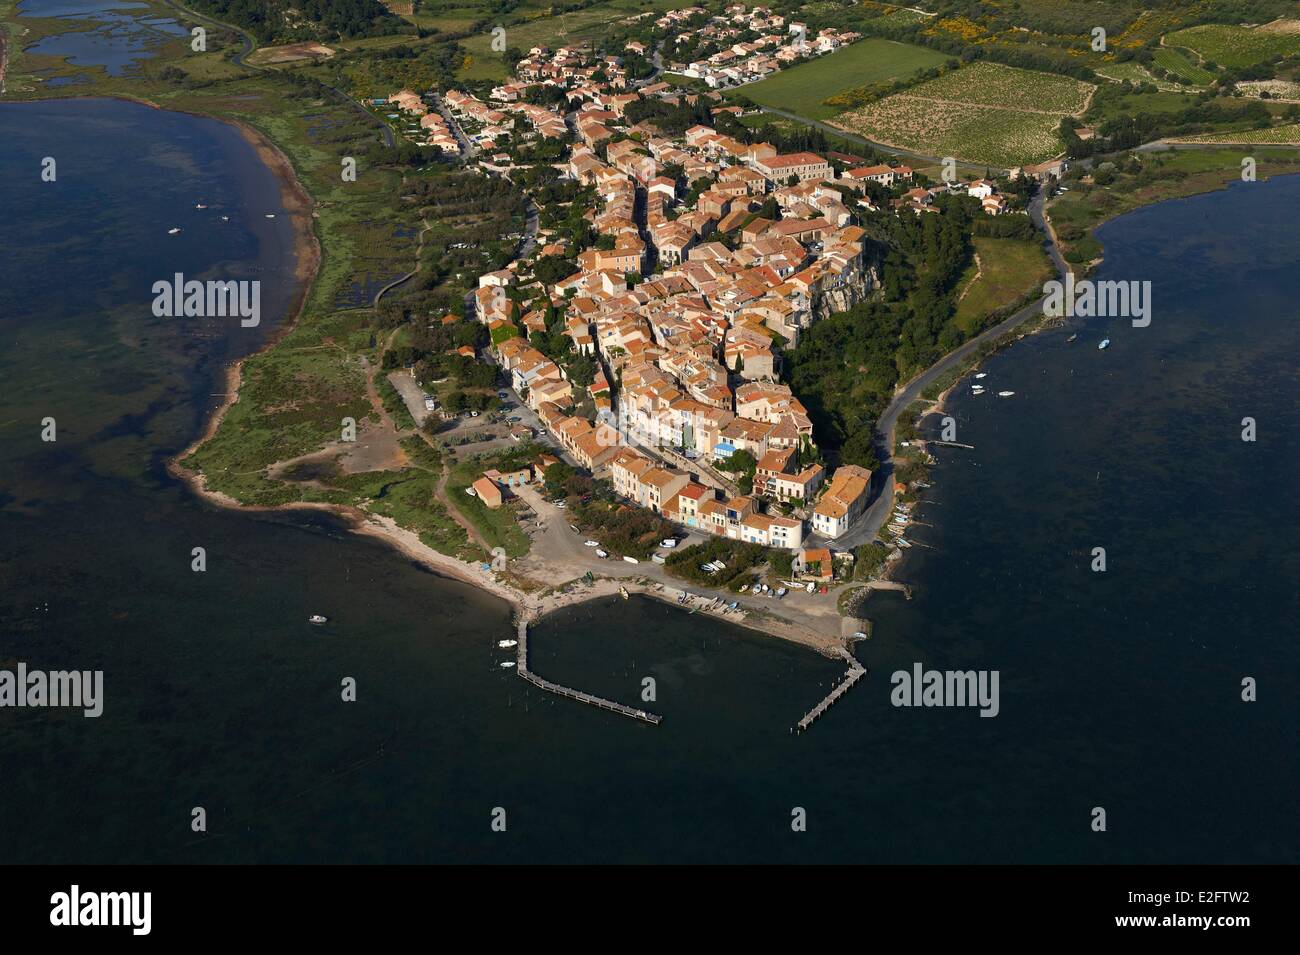 France Aude Bages (aerial view Stock Photo - Alamy